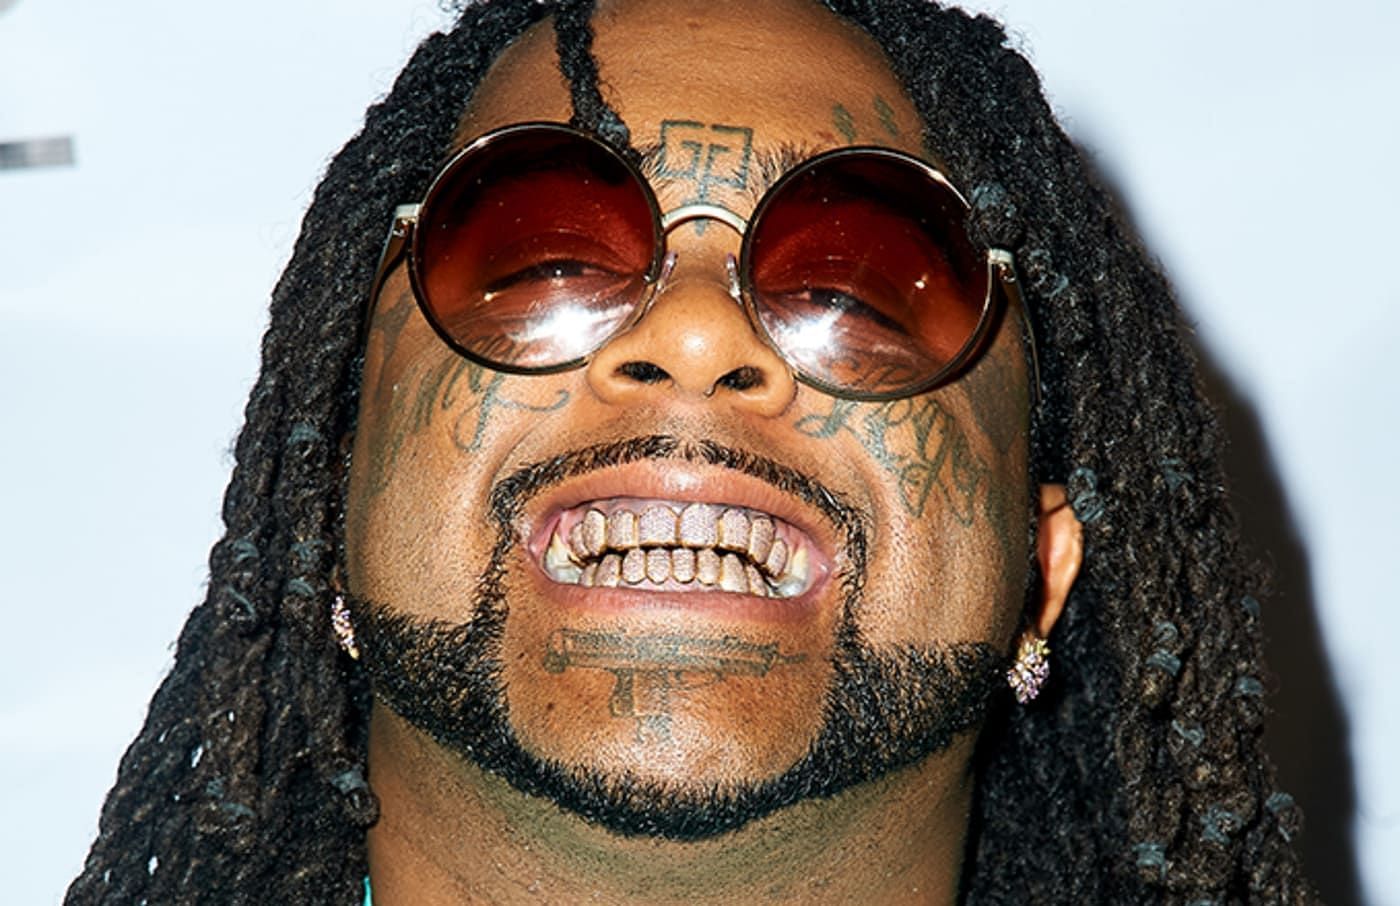 O3 Greedo is not dead: Details revealed about the artist after manager confirmed about the rapper being alive. (Image via Getty Images)